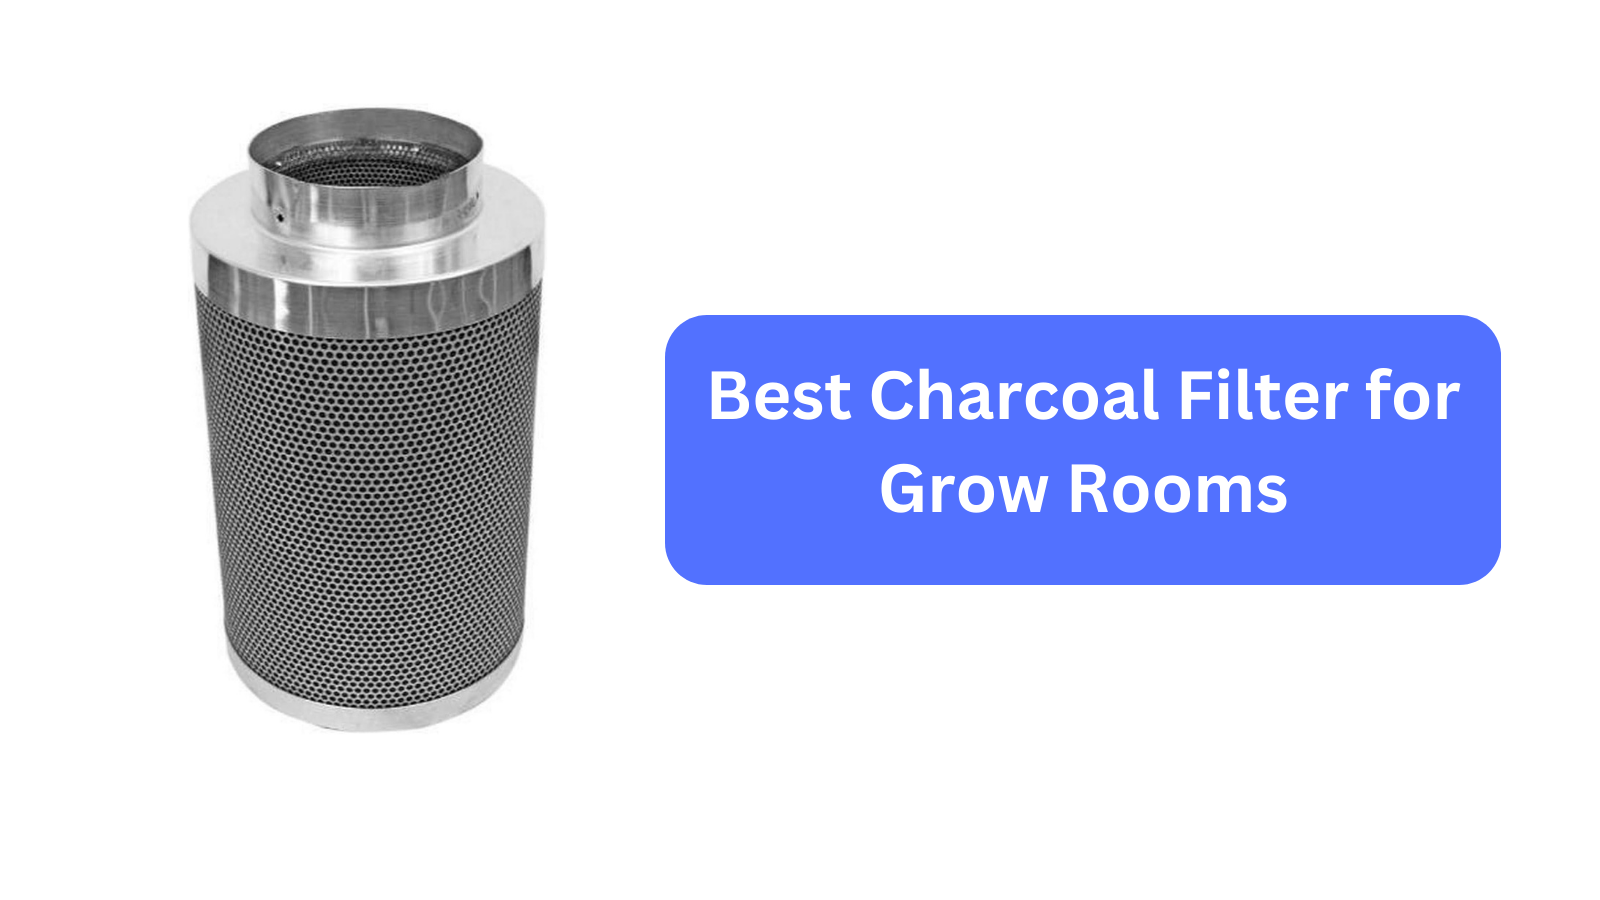 Best Charcoal Filter for Grow Rooms